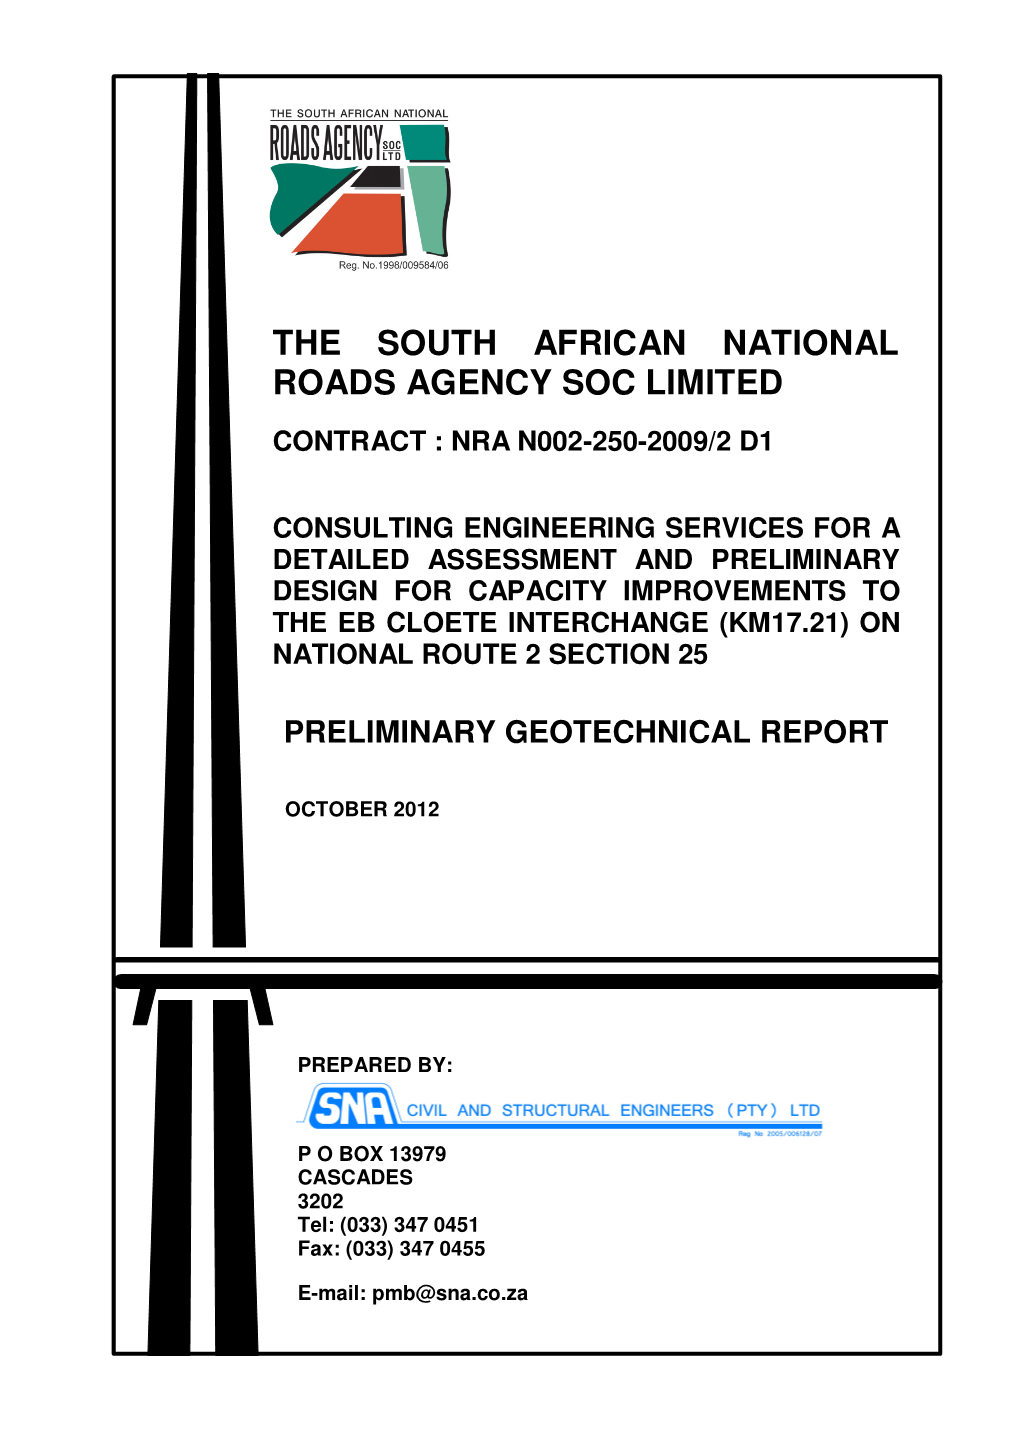 The South African National Roads Agency Soc Limited